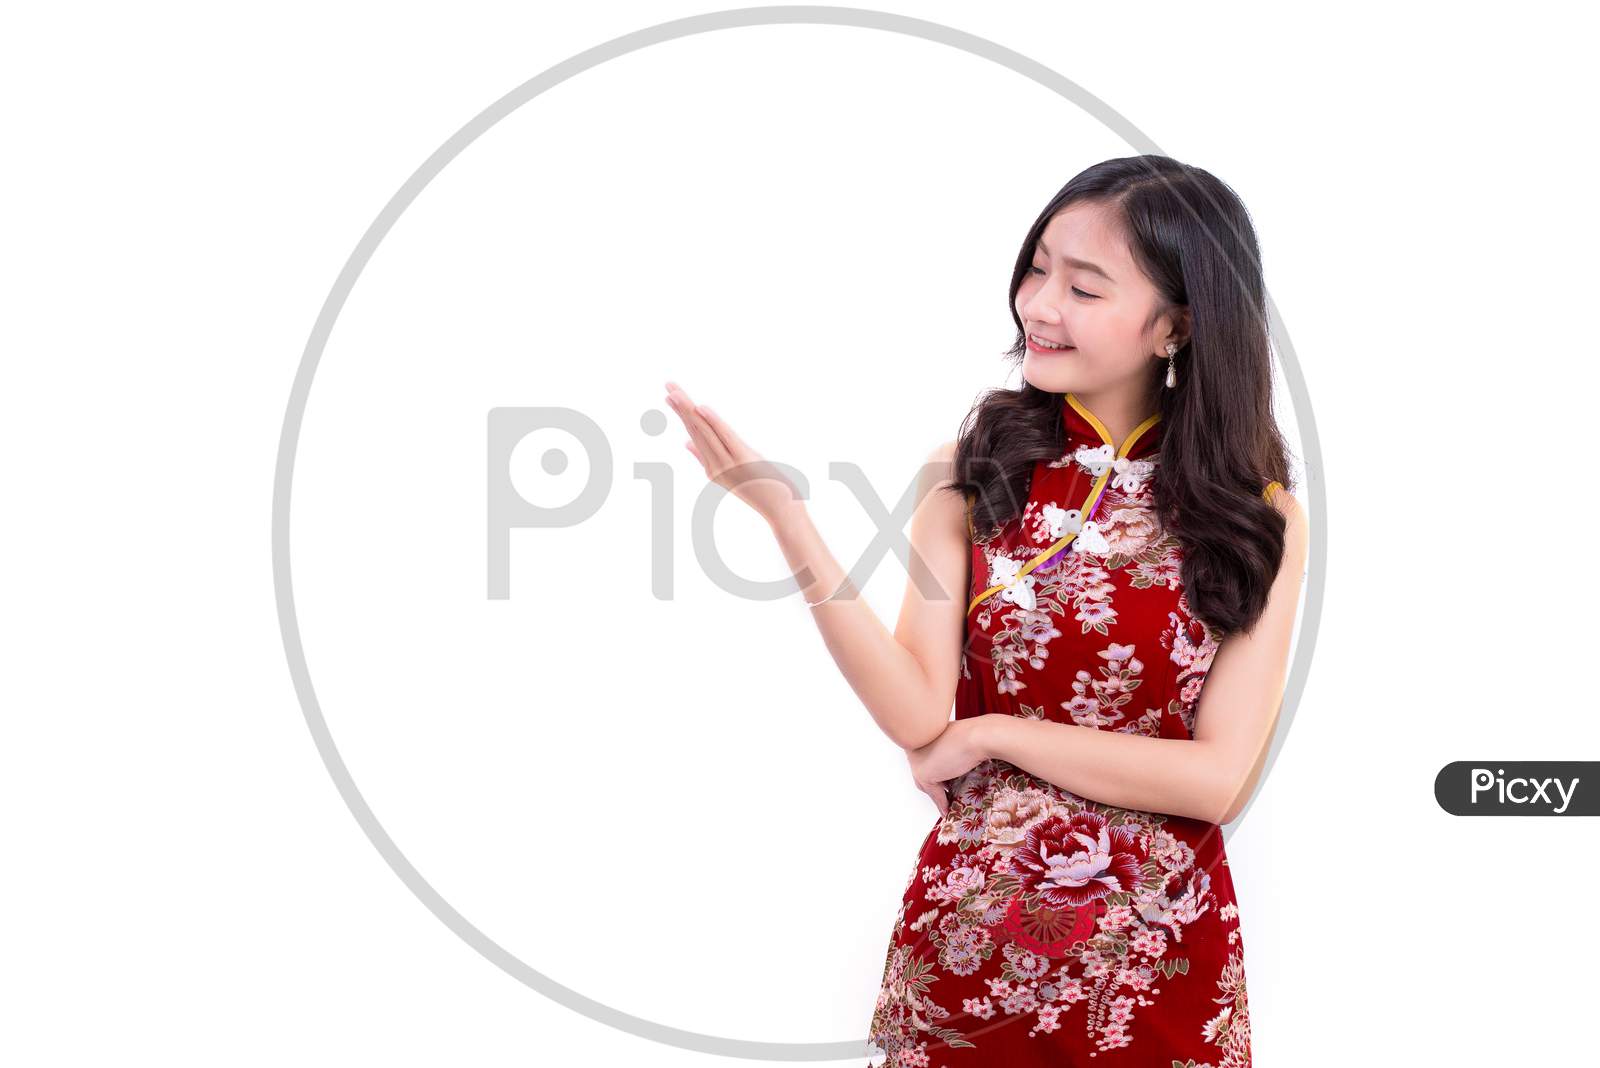 Young Asian Beauty Woman Wearing Cheongsam And Presenting With Hands Gesture In Chinese New Year Festival Event On Isolated White Background. Holiday And Lifestyle Concept. Qipao Dress Wearing